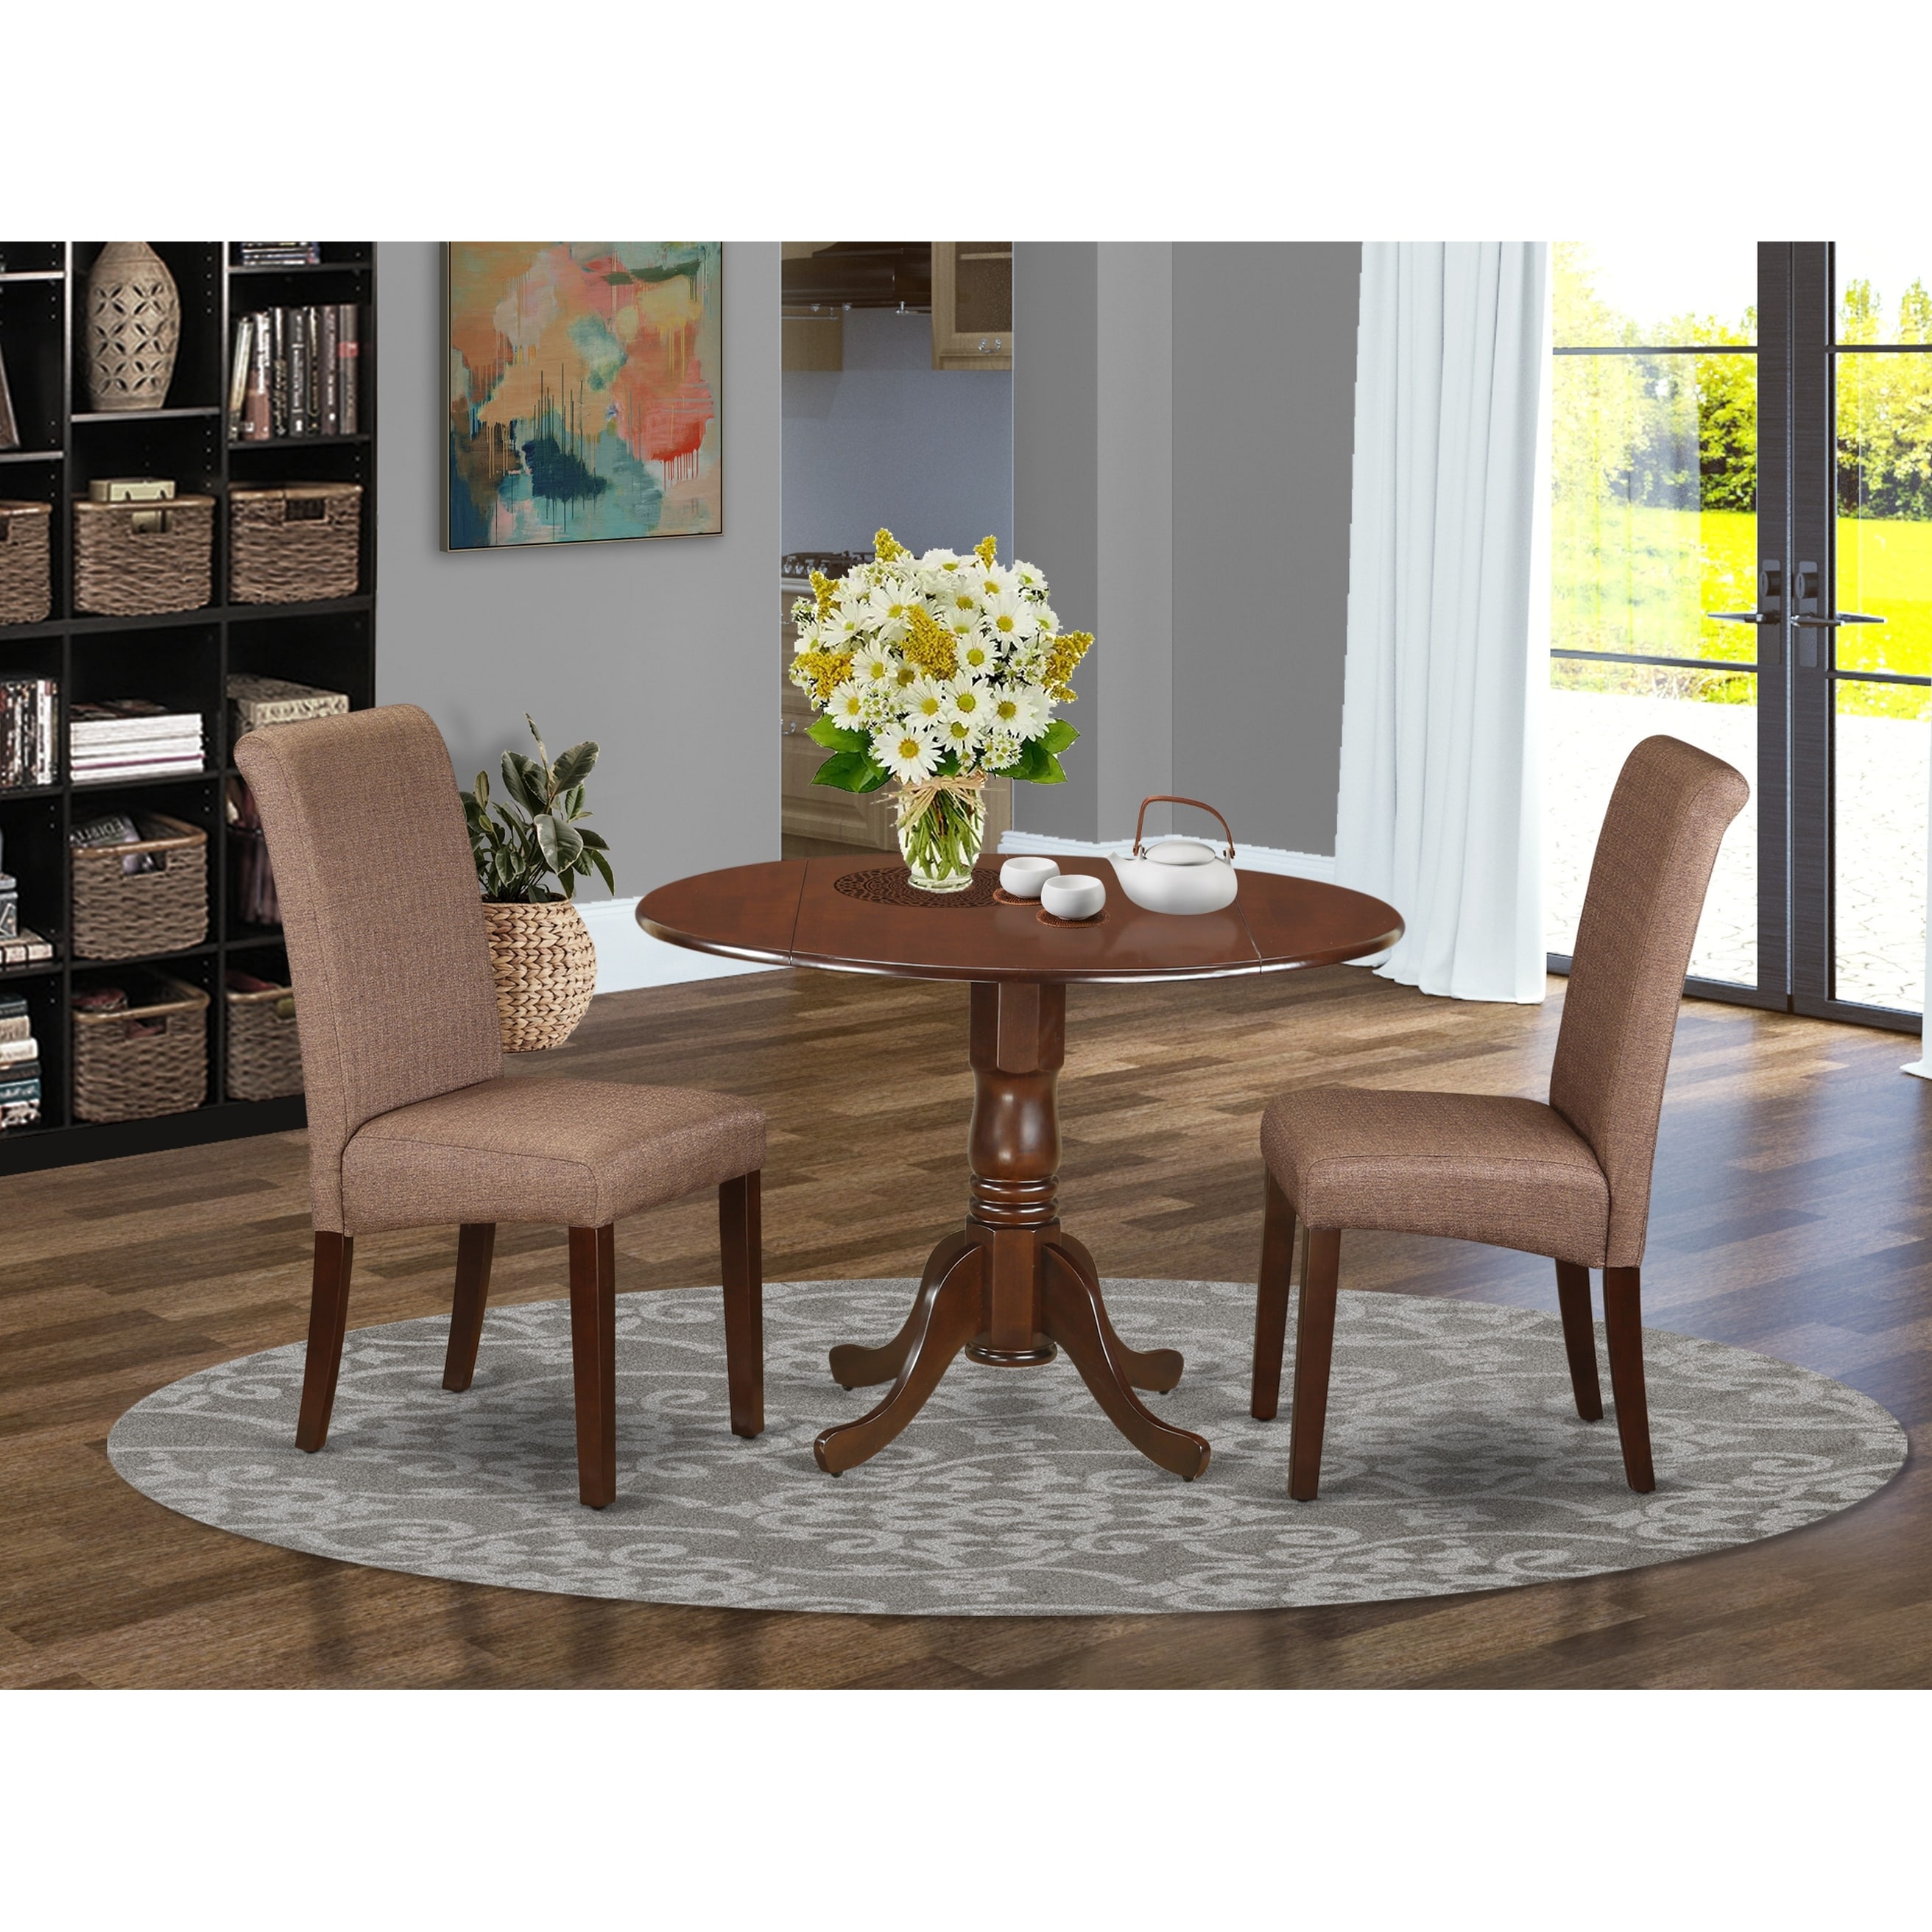 3pc Small Round Kitchen Table With Elegant Parson Chairs Number Of Chair Option Overstock 27864825